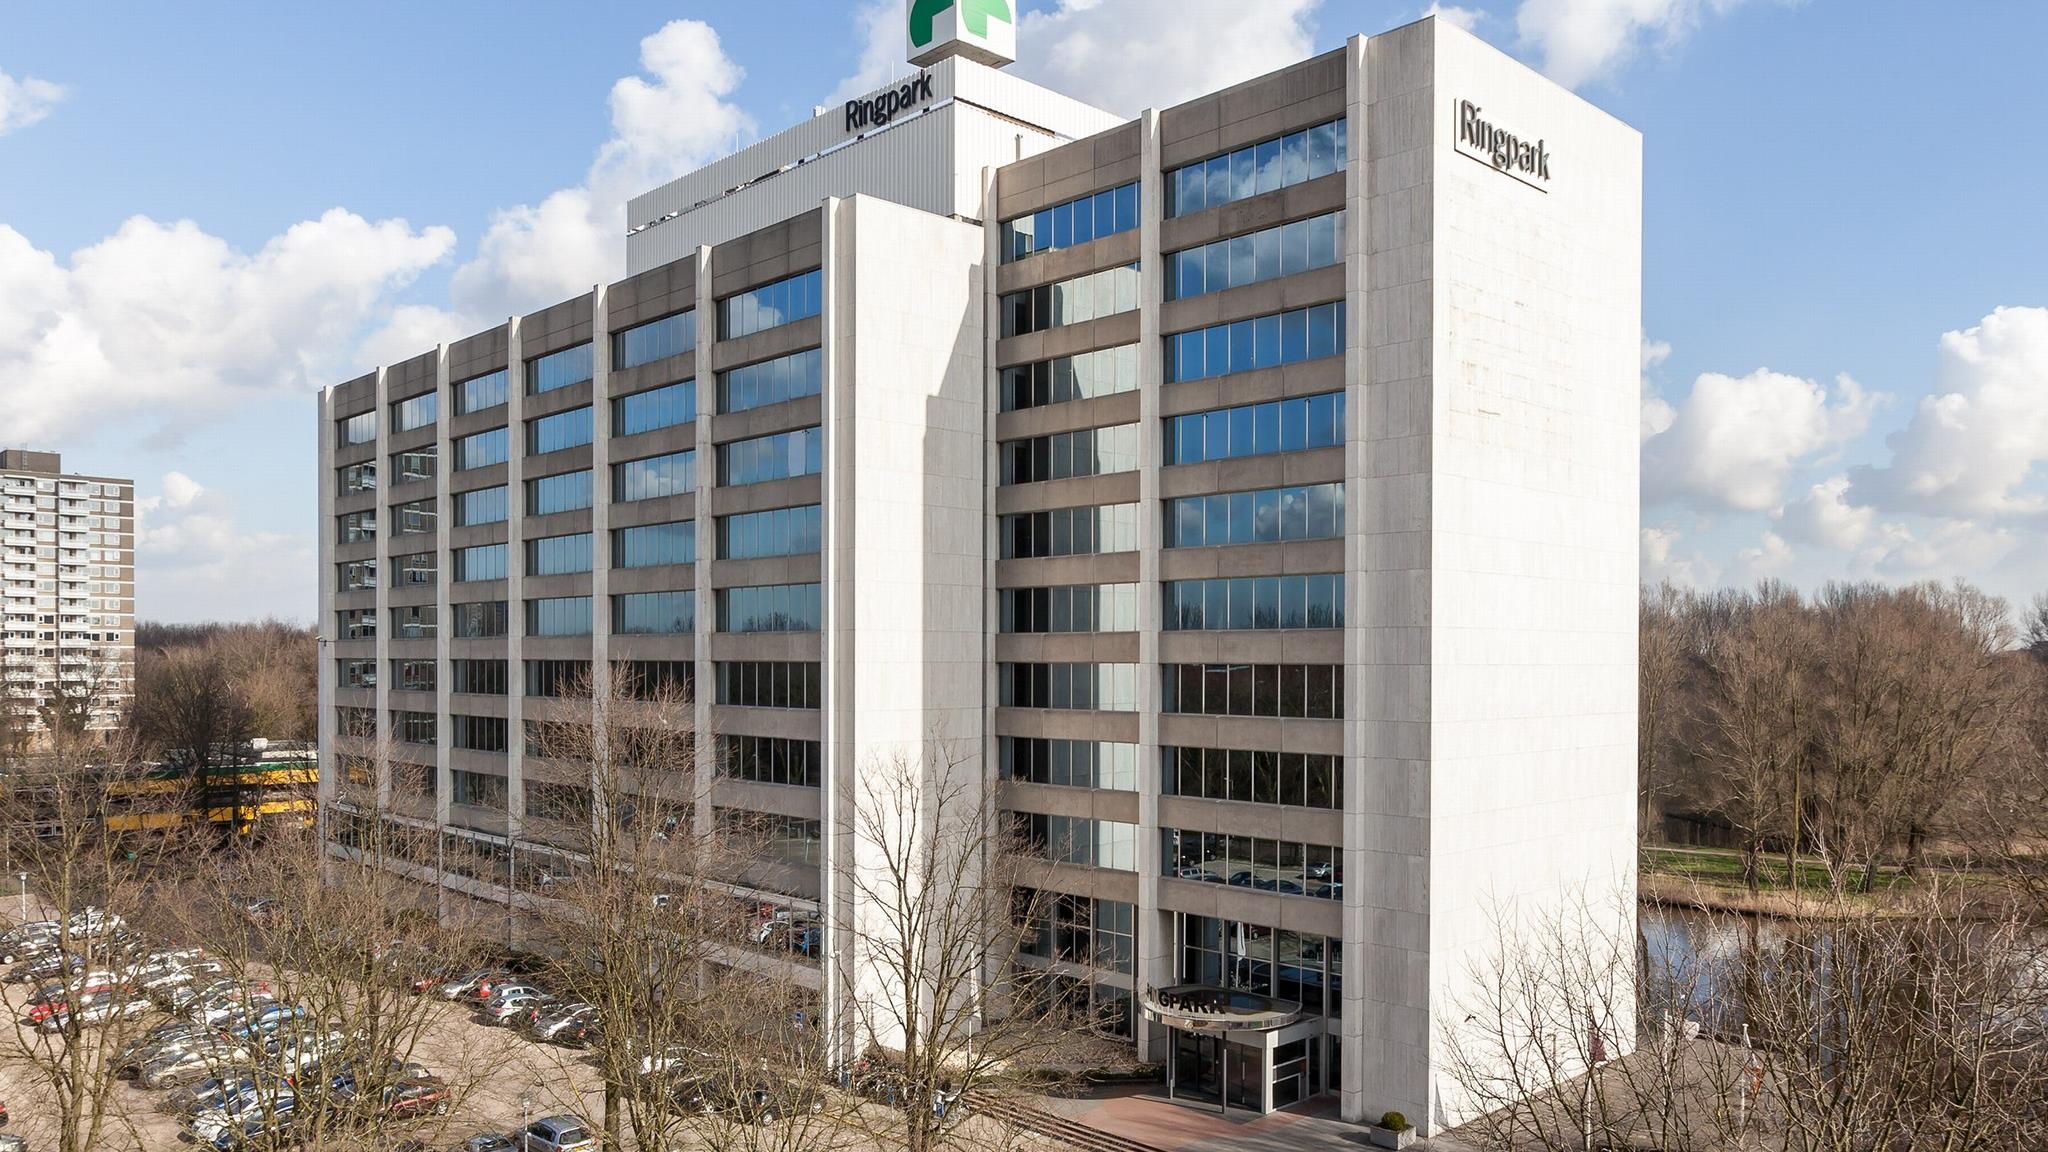 Round Hill Capital acquires a central Amsterdam asset targeted for urban regeneration